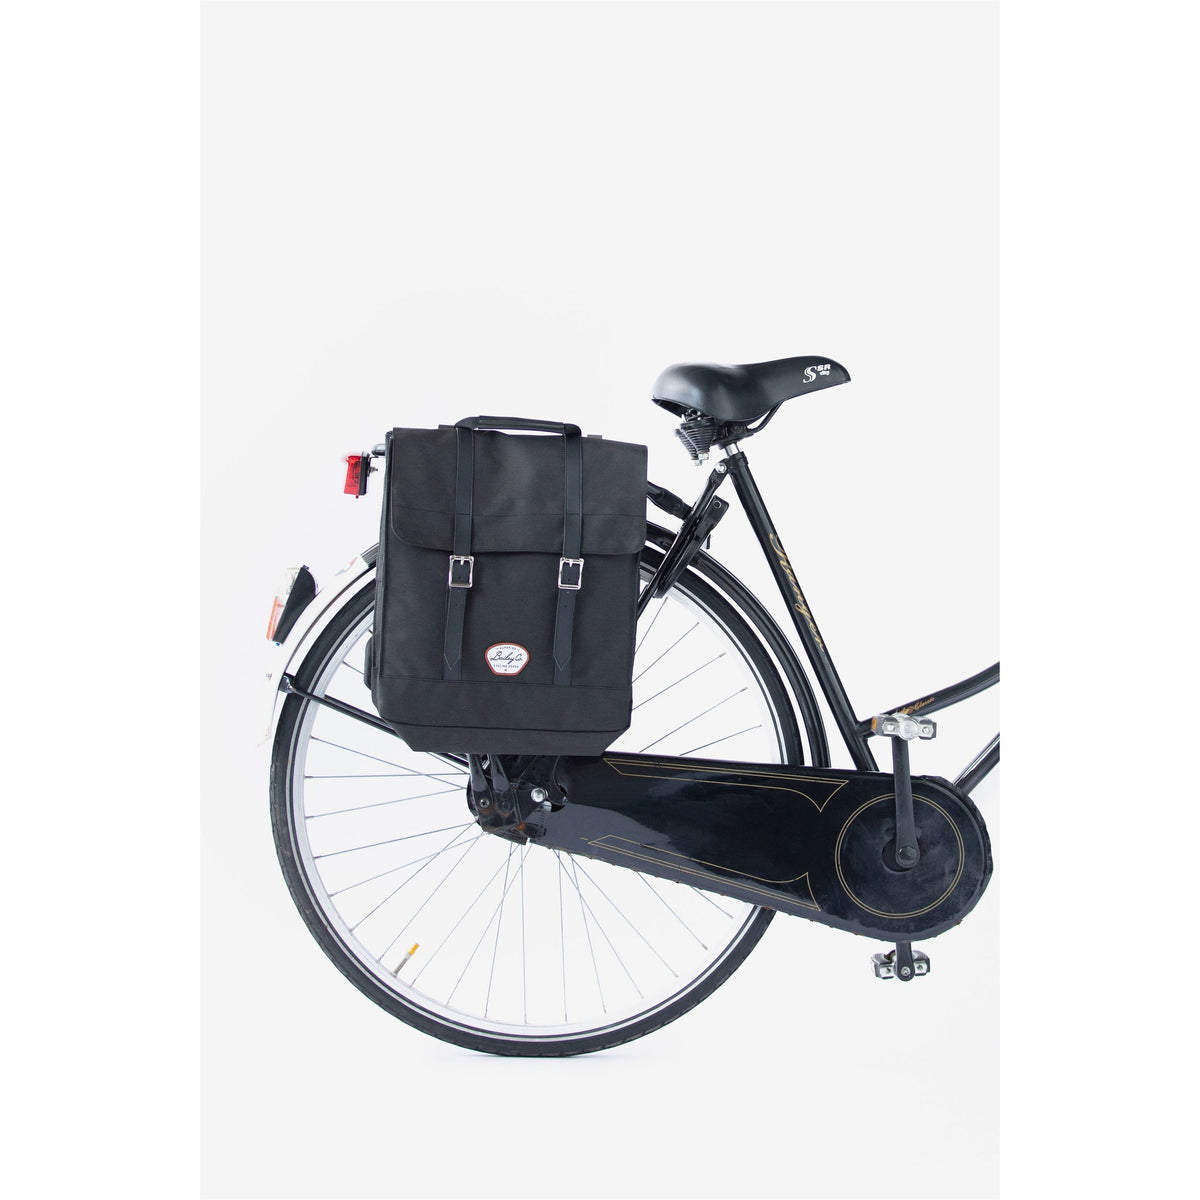 Bailey Co Richmond Convertible Pannier Backpack in Black on bike